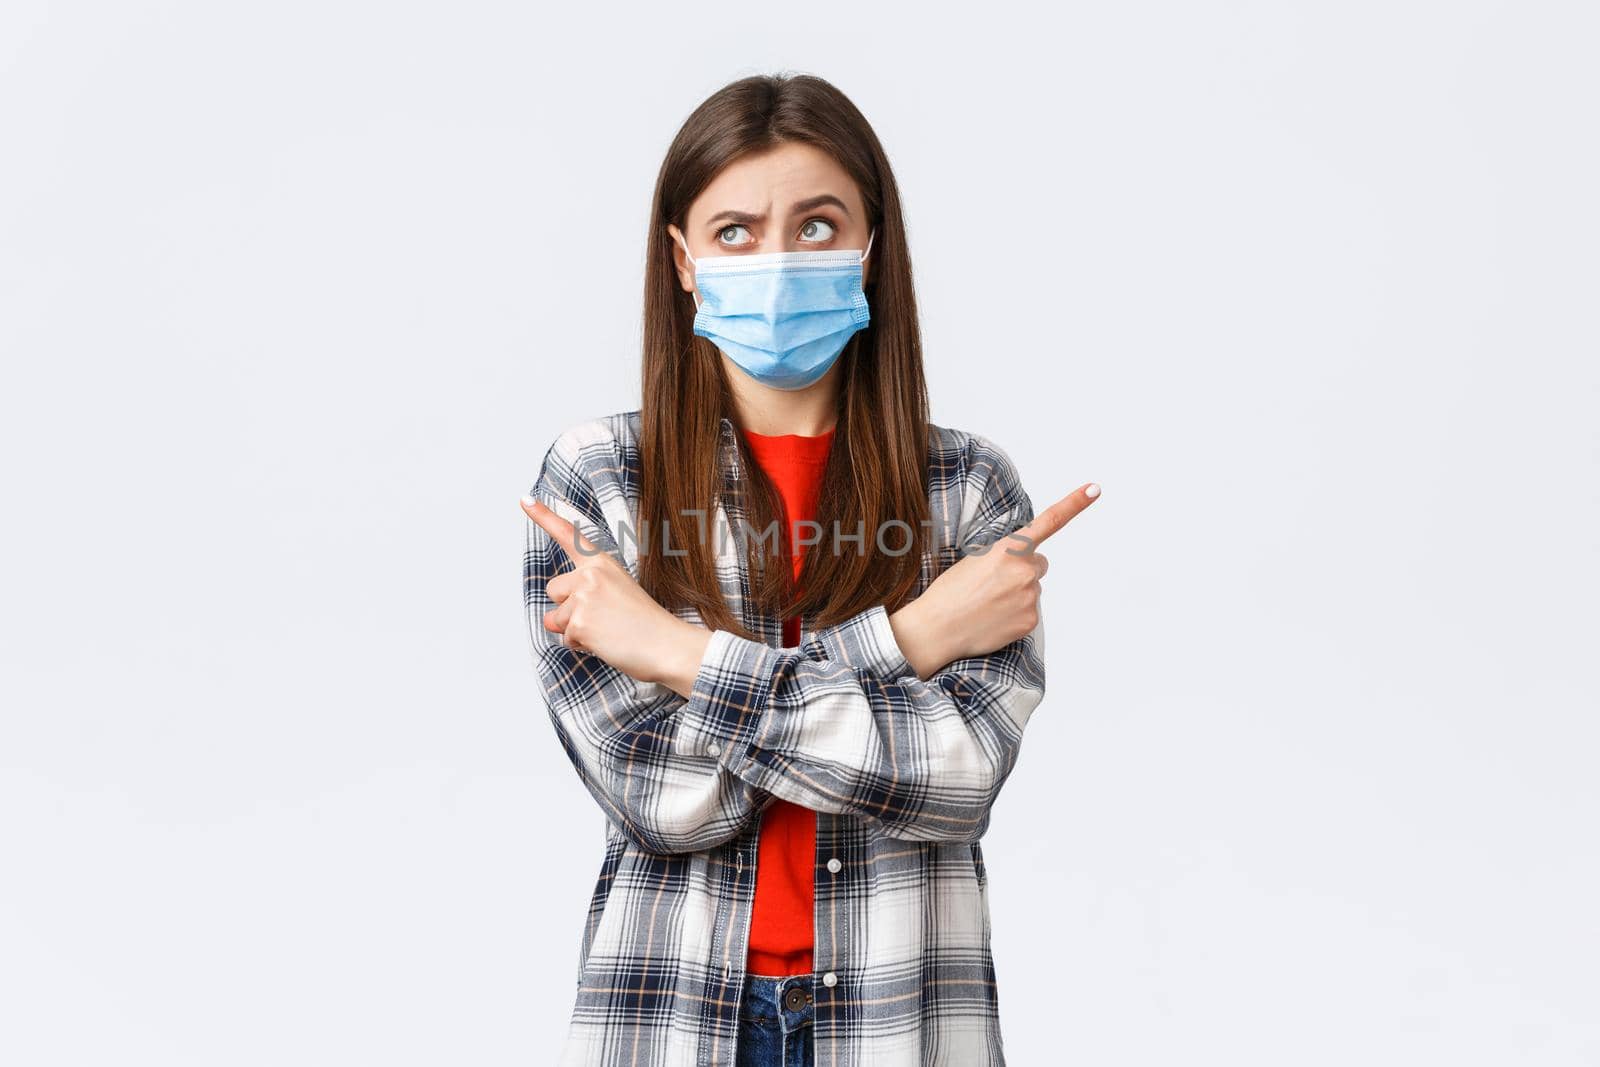 Coronavirus outbreak, leisure on quarantine, social distancing and emotions concept. Indecisive young woman making choice. Girl in medical mask puzzled facing decision, point sideways, think.